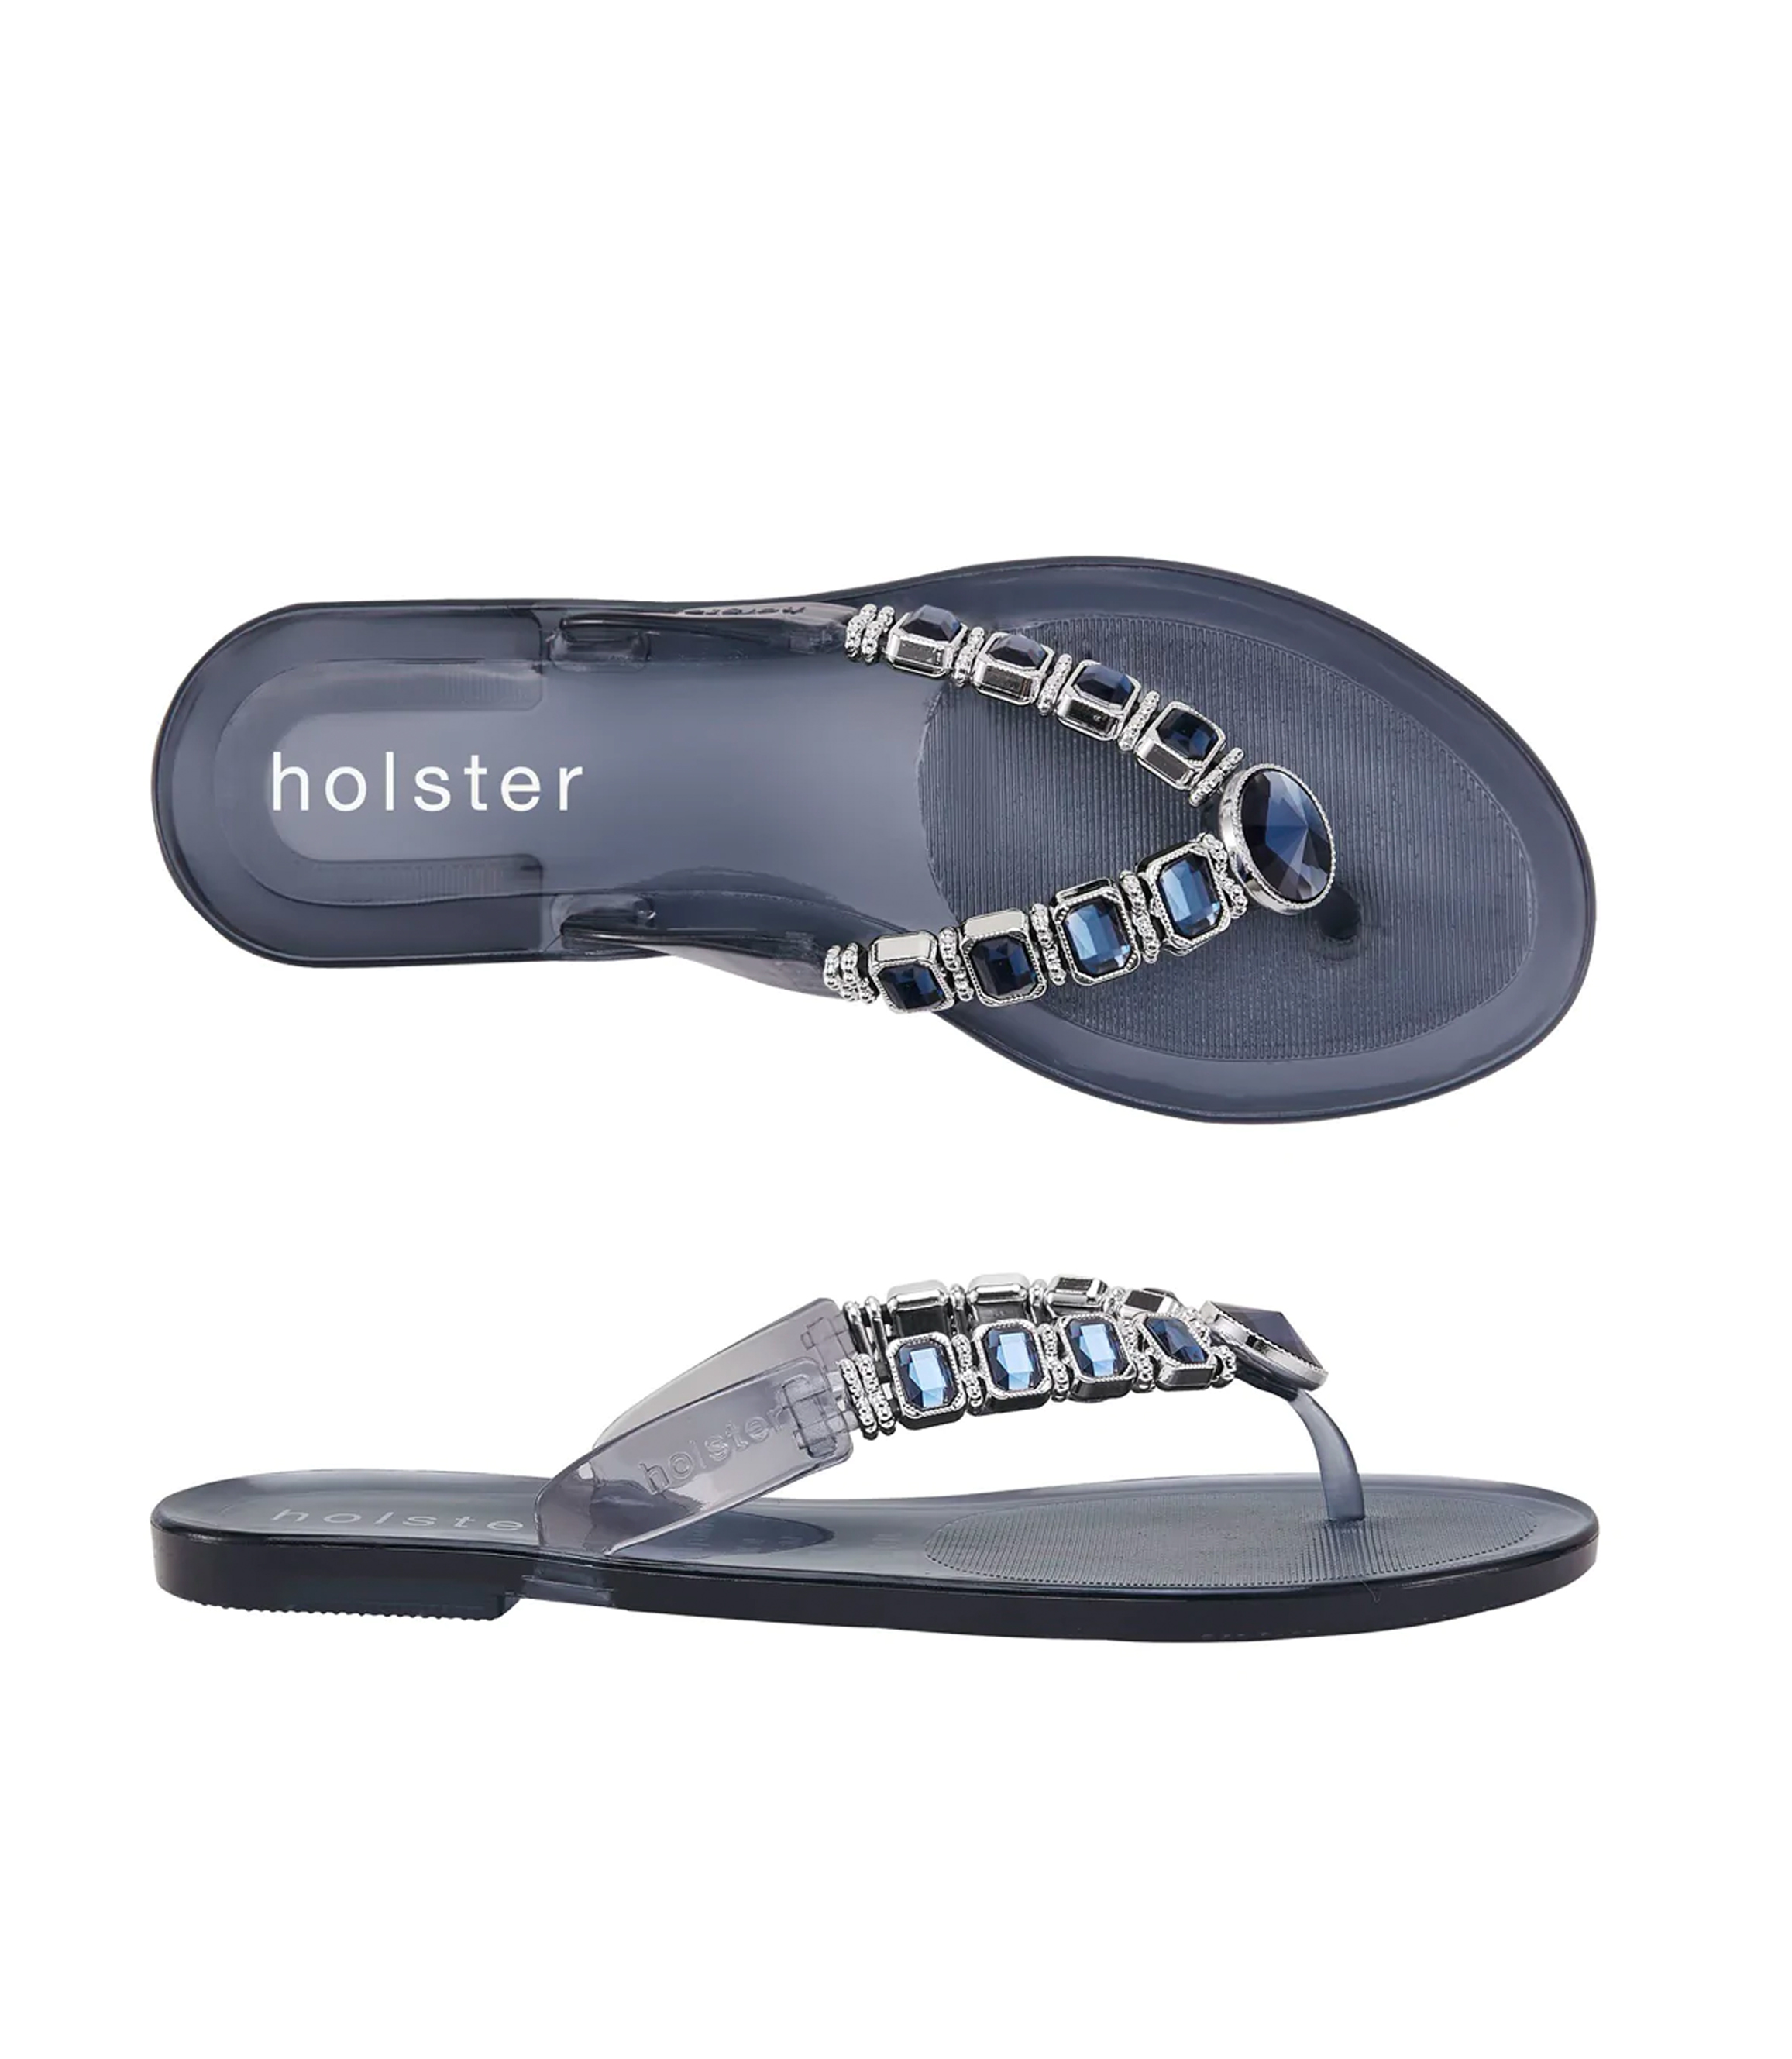 Awesome Dot take medicine HOLSTER MIDNIGHT BLUE MIRANDA SANDALS | Rosella - Style inspired by elegance